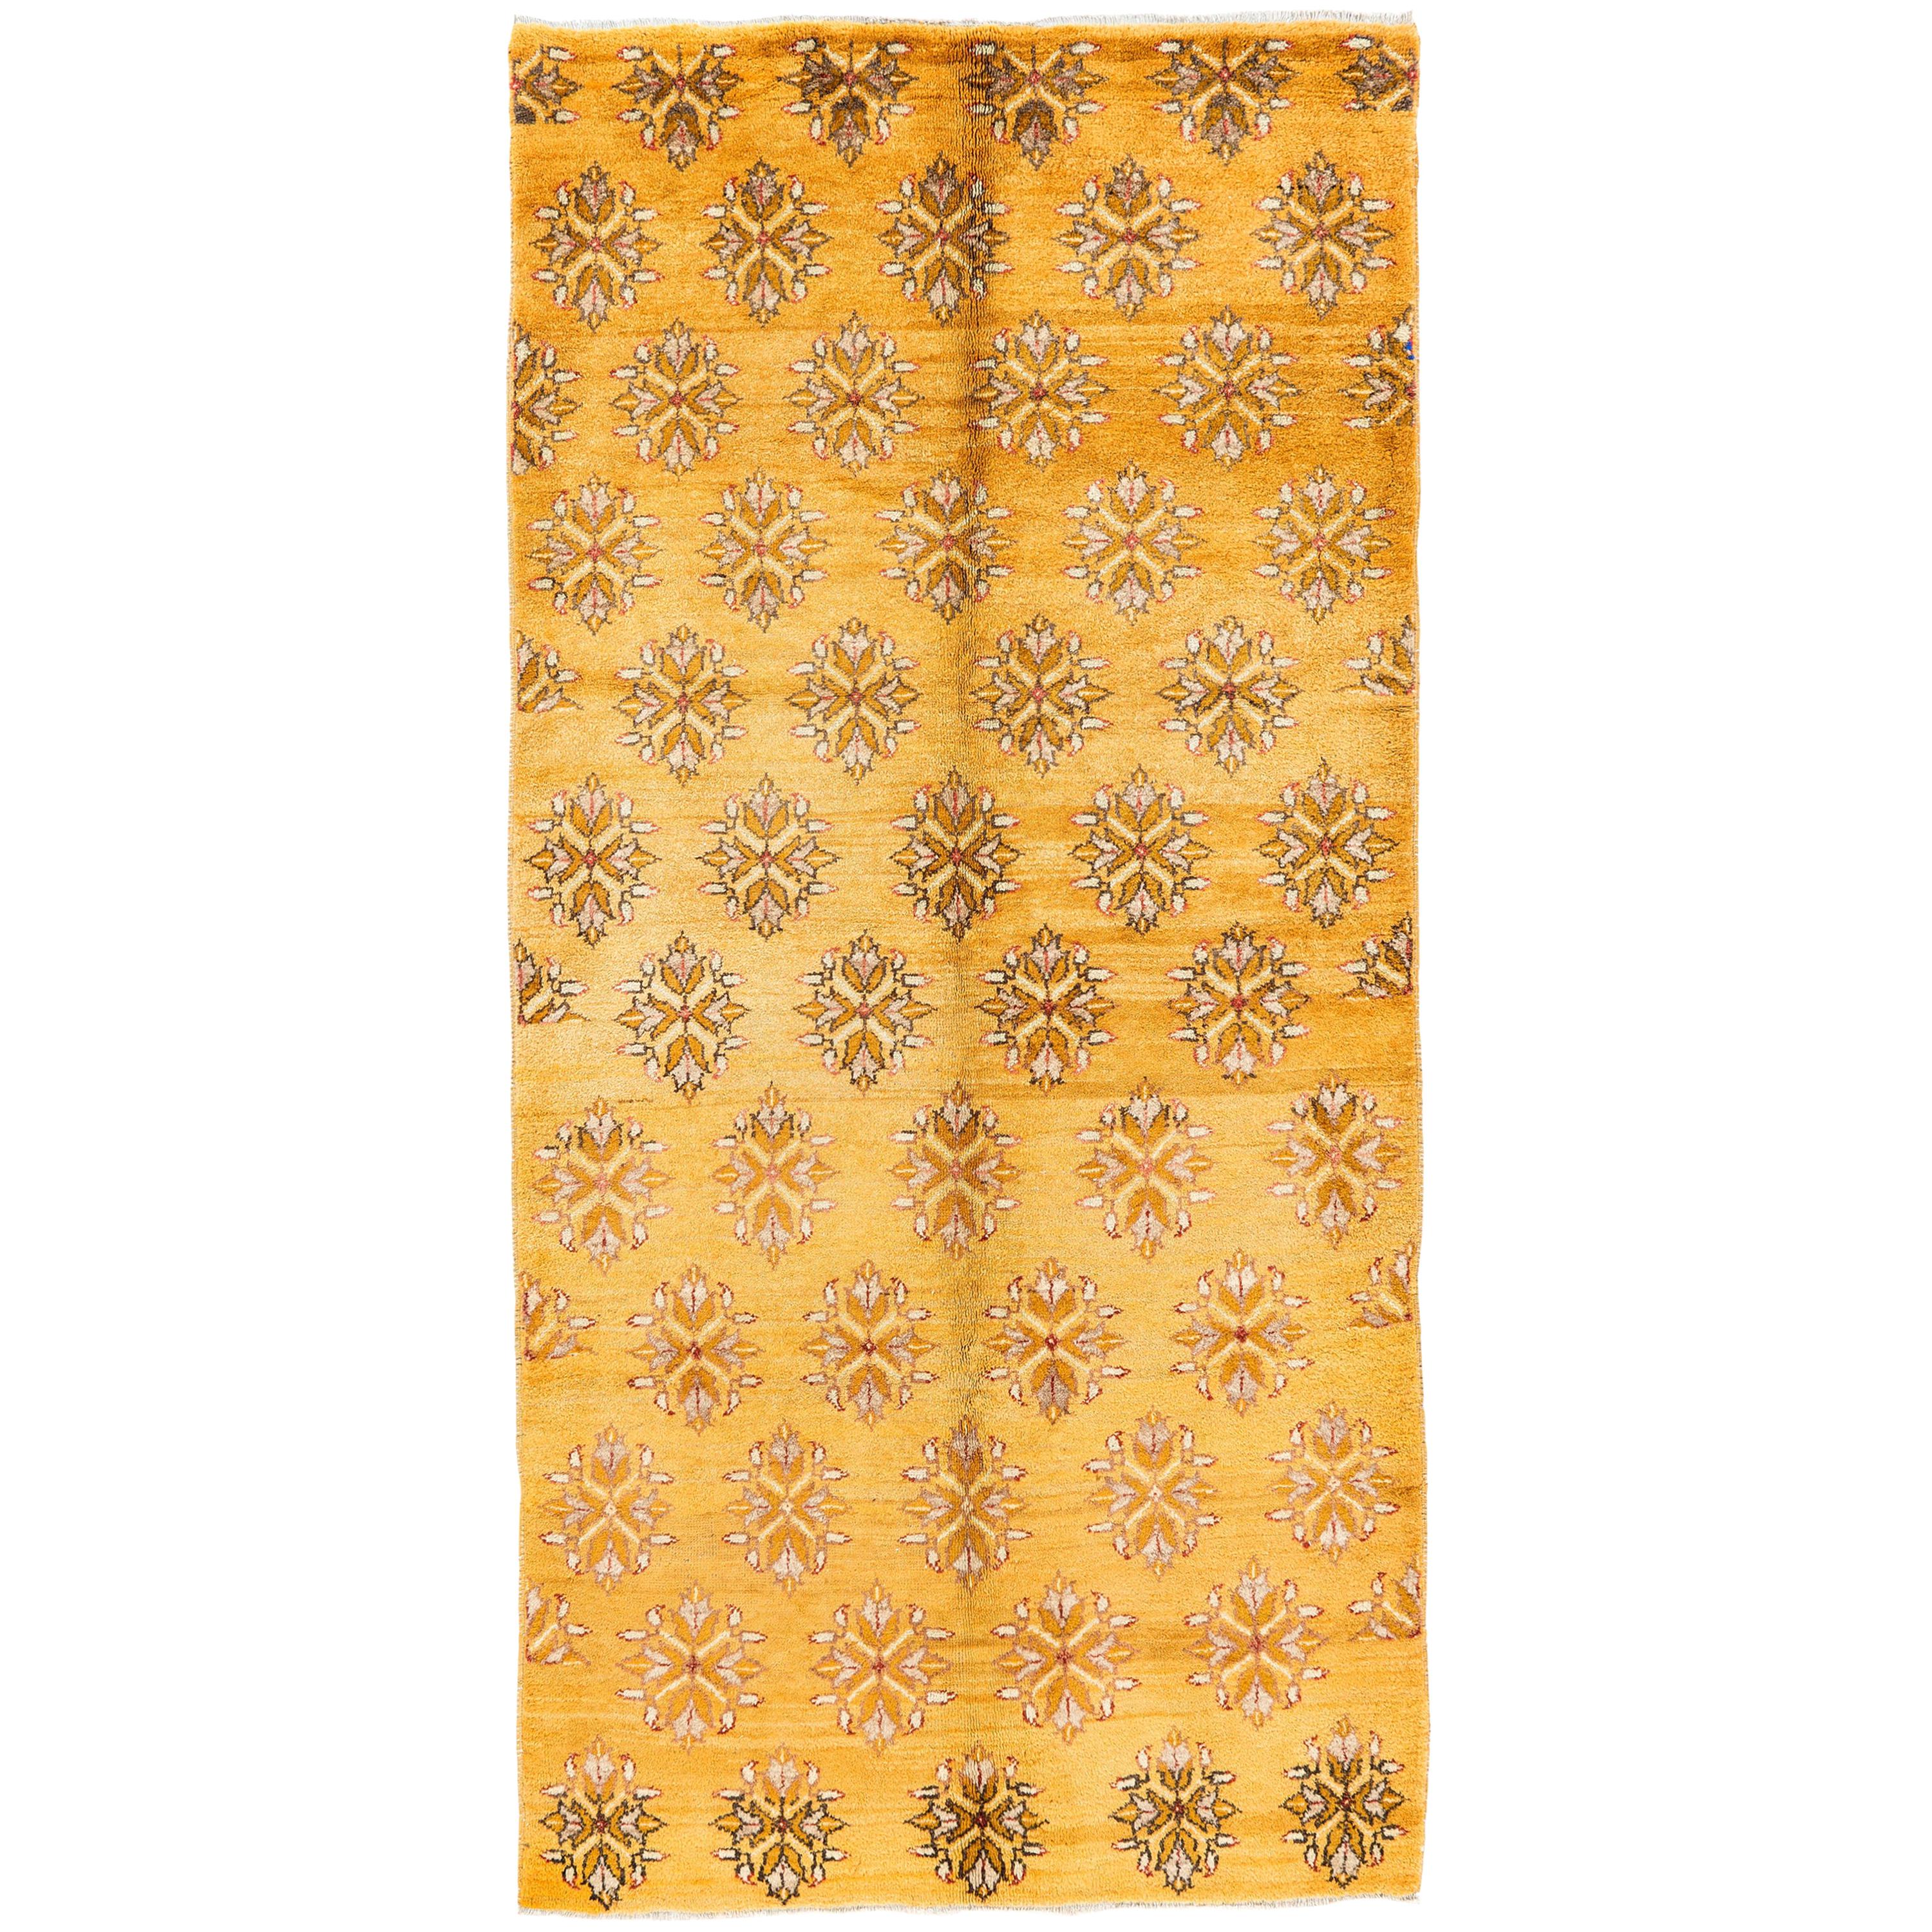 5x10 Ft One-of-a-Kind 1950s Handmade Turkish Wool Rug in Butterscotch Yellow For Sale